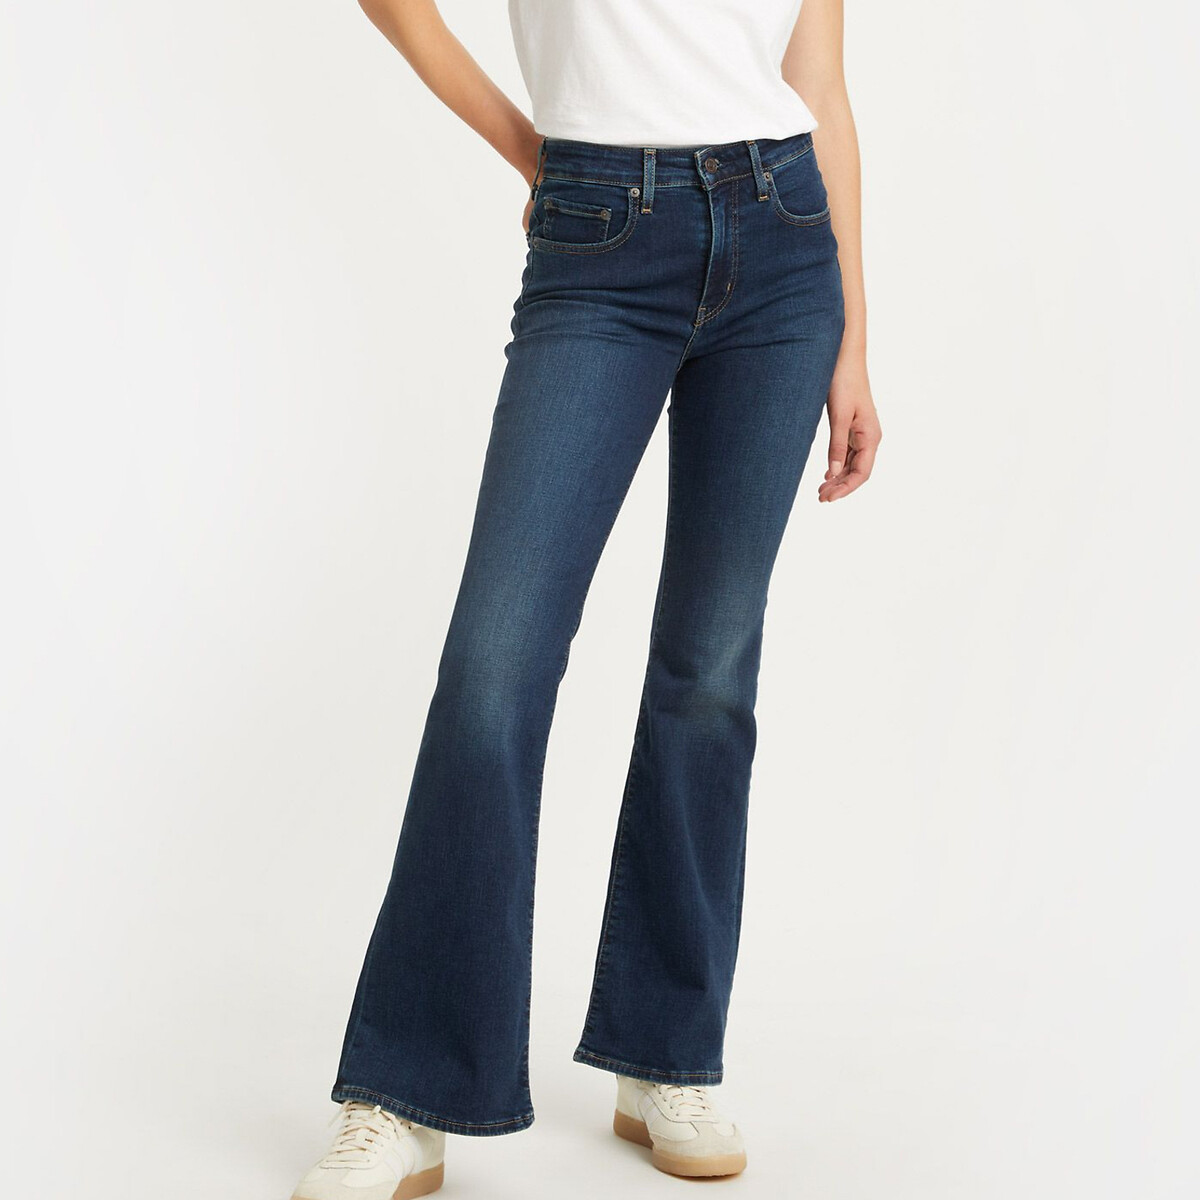 726 Hr Flare Jeans